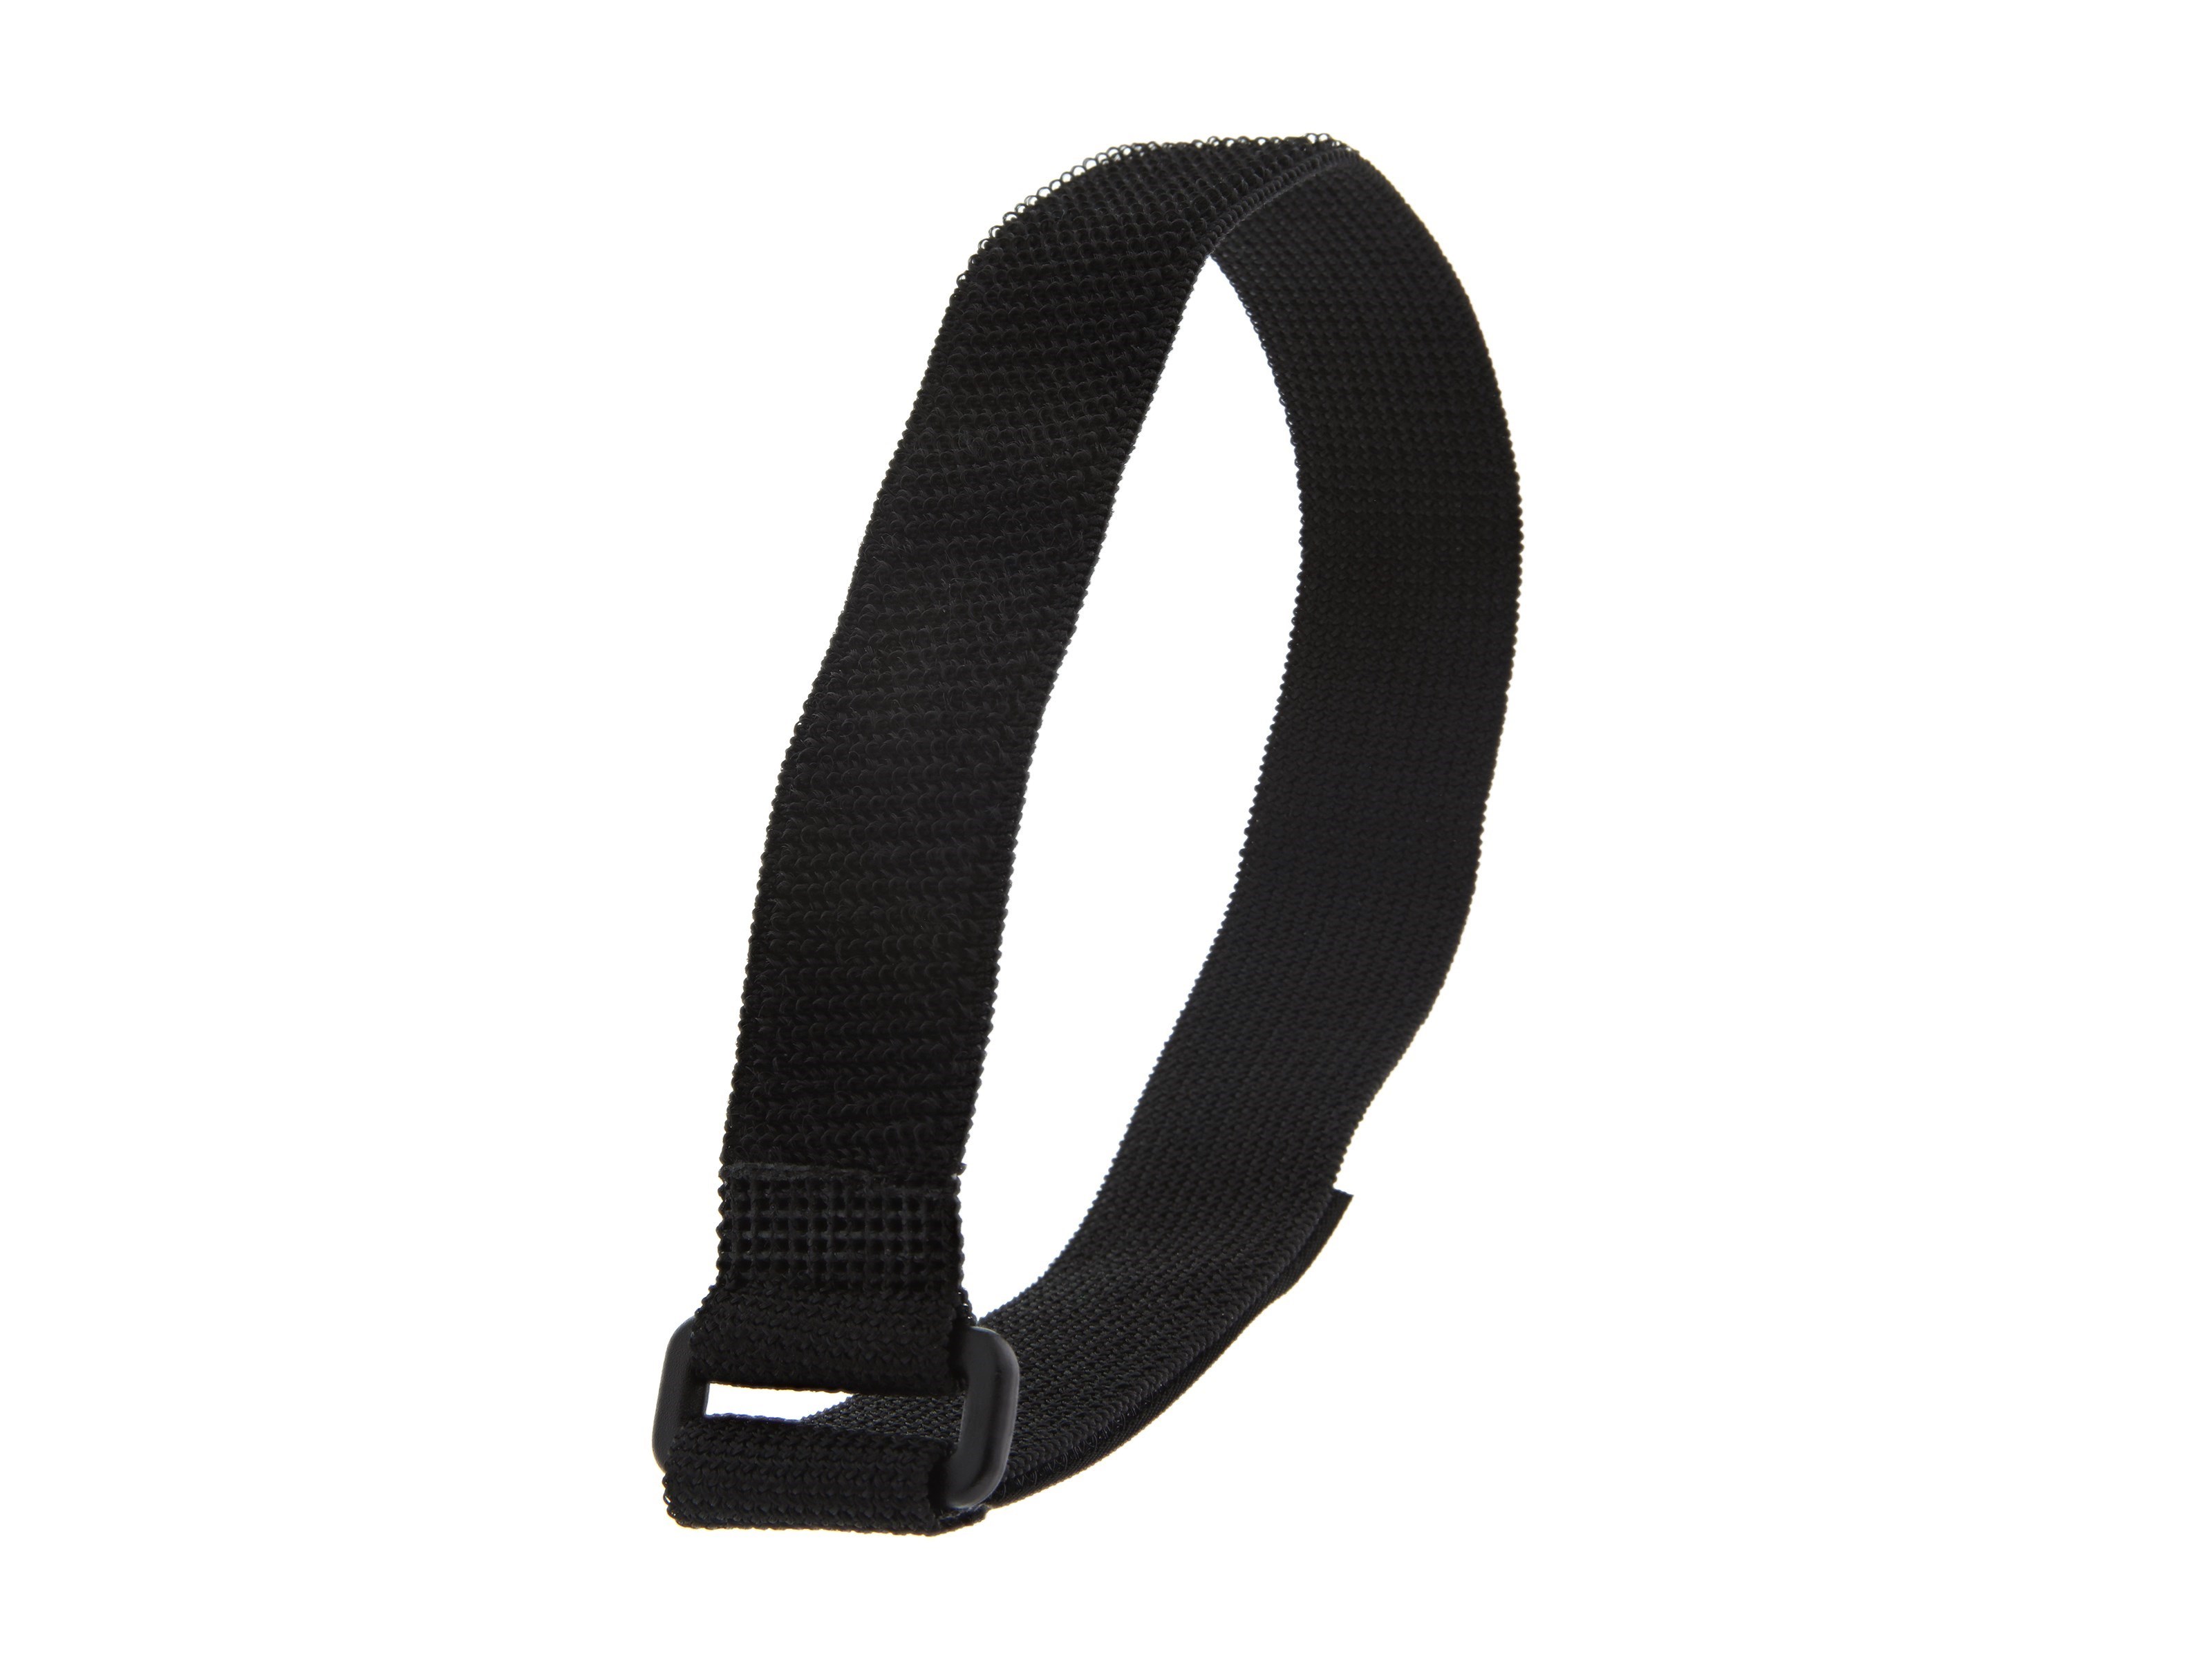 https://www.securecableties.com/content/images/thumbs/000/0005267_all-purpose-elastic-cinch-strap-18-x-1-inch-5-pack.jpeg